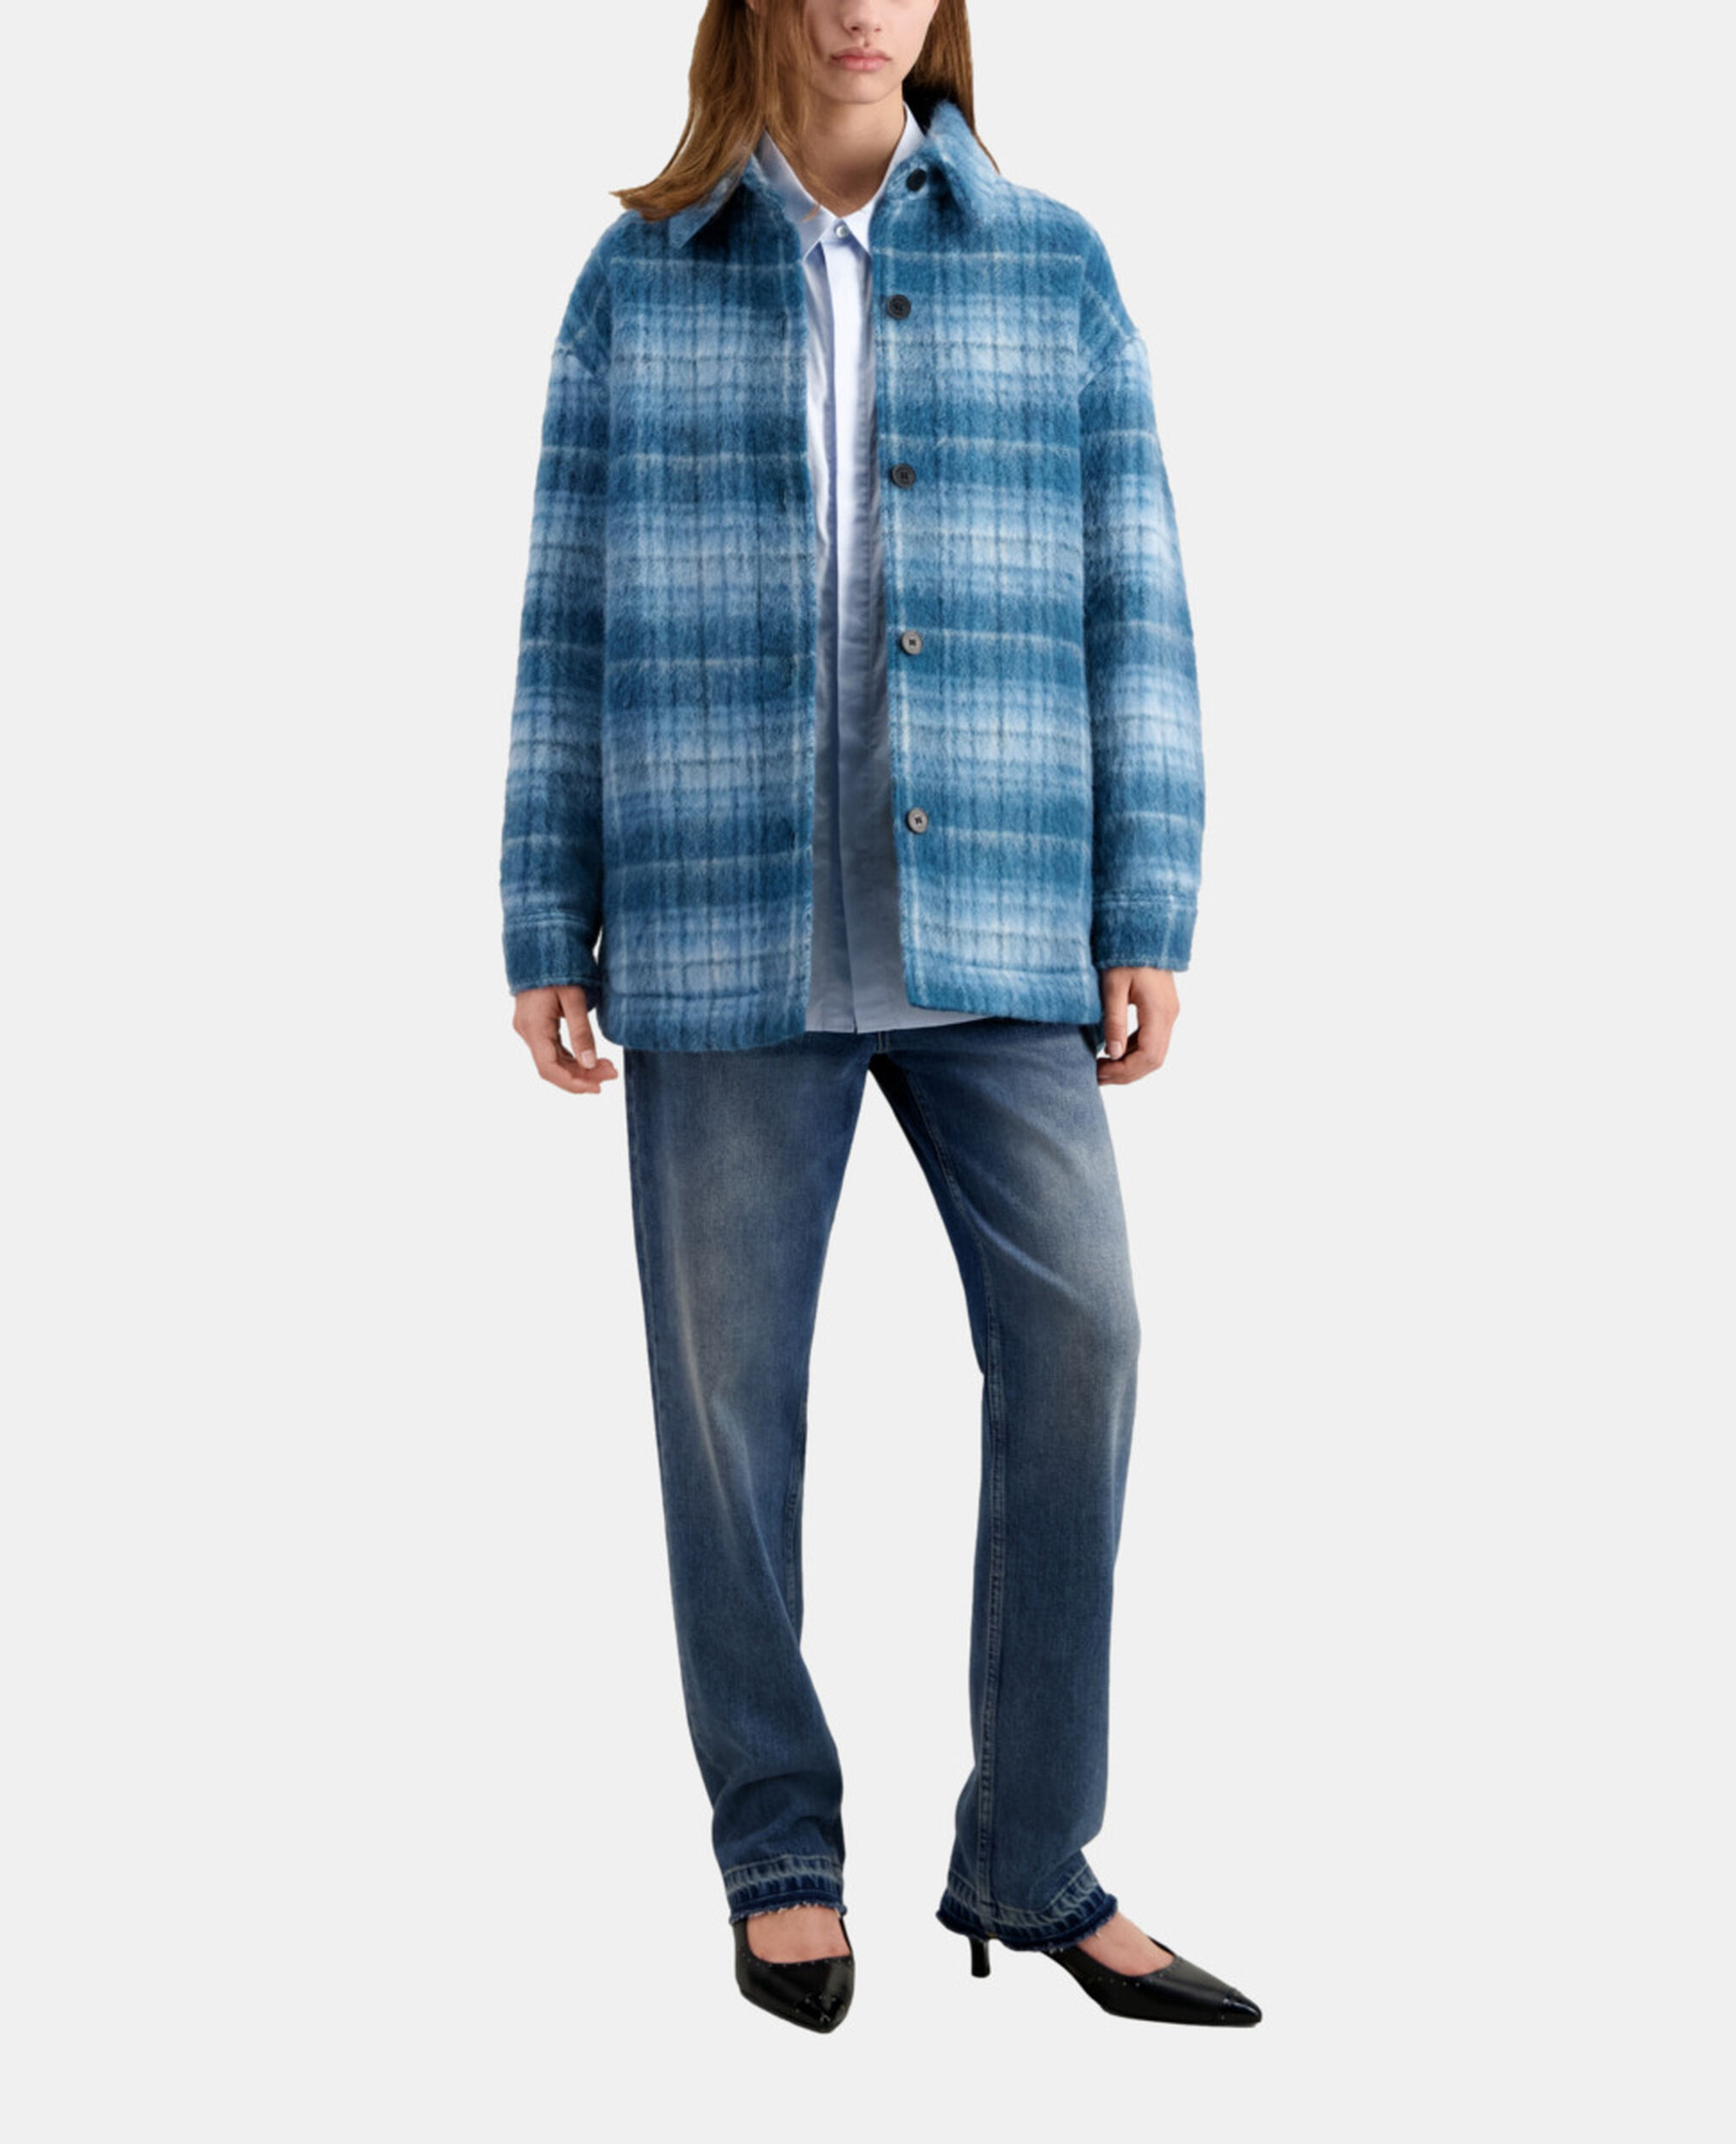 Overshirt style jacket with blue checks, BLUE BEIGE, hi-res image number null